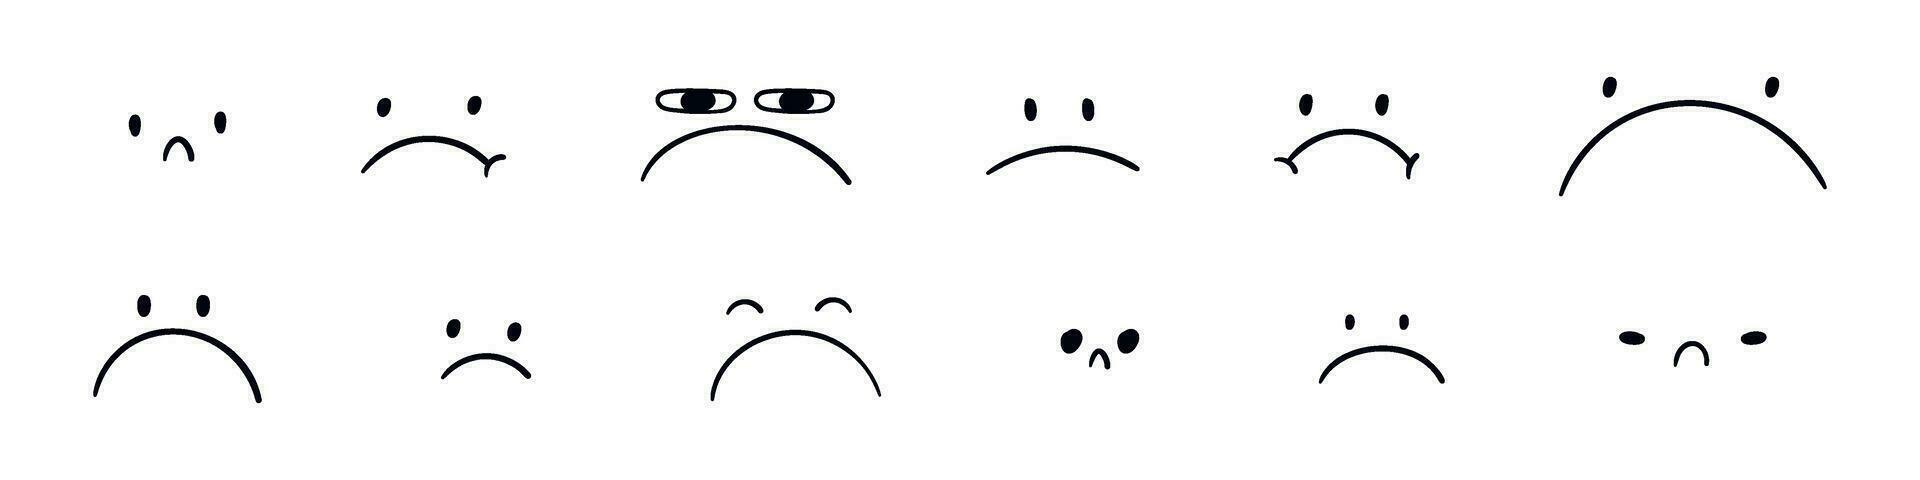 Set of cartoon character faces with emotions like sadness with doodle eyes. Flat vector illustration isolated on white background.